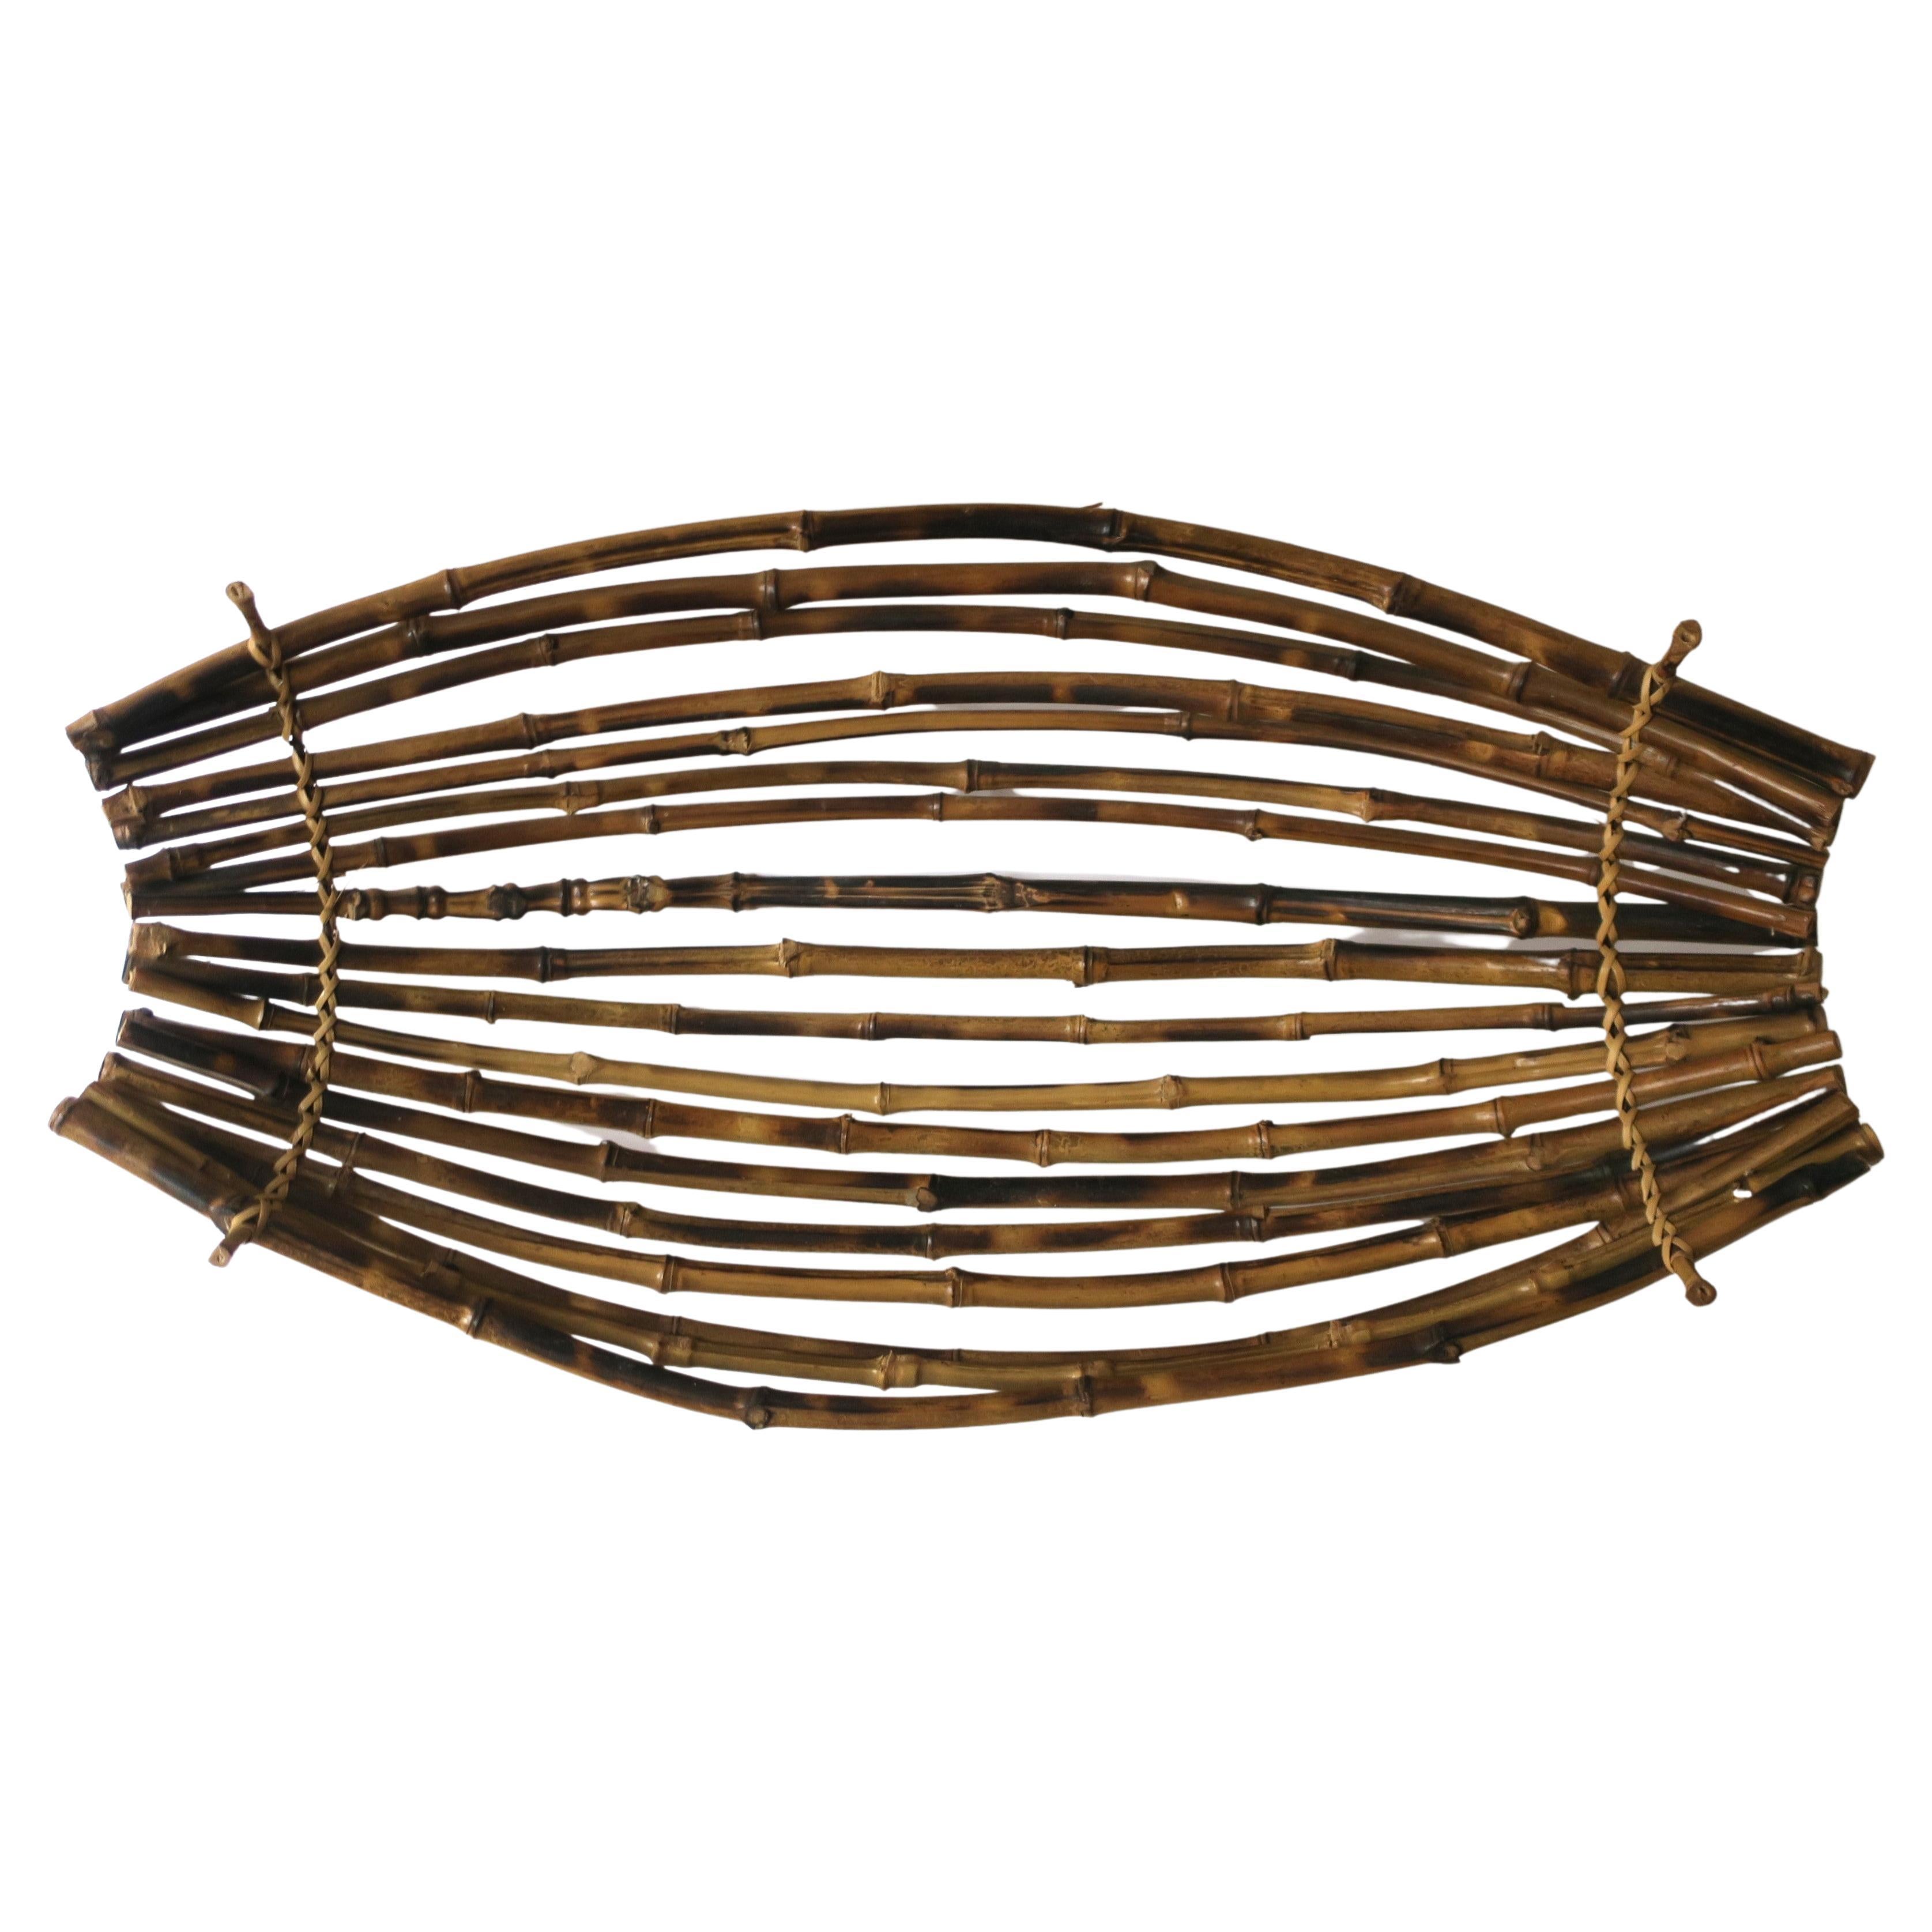 Japanese Wicker Bamboo Centerpiece Basket For Sale